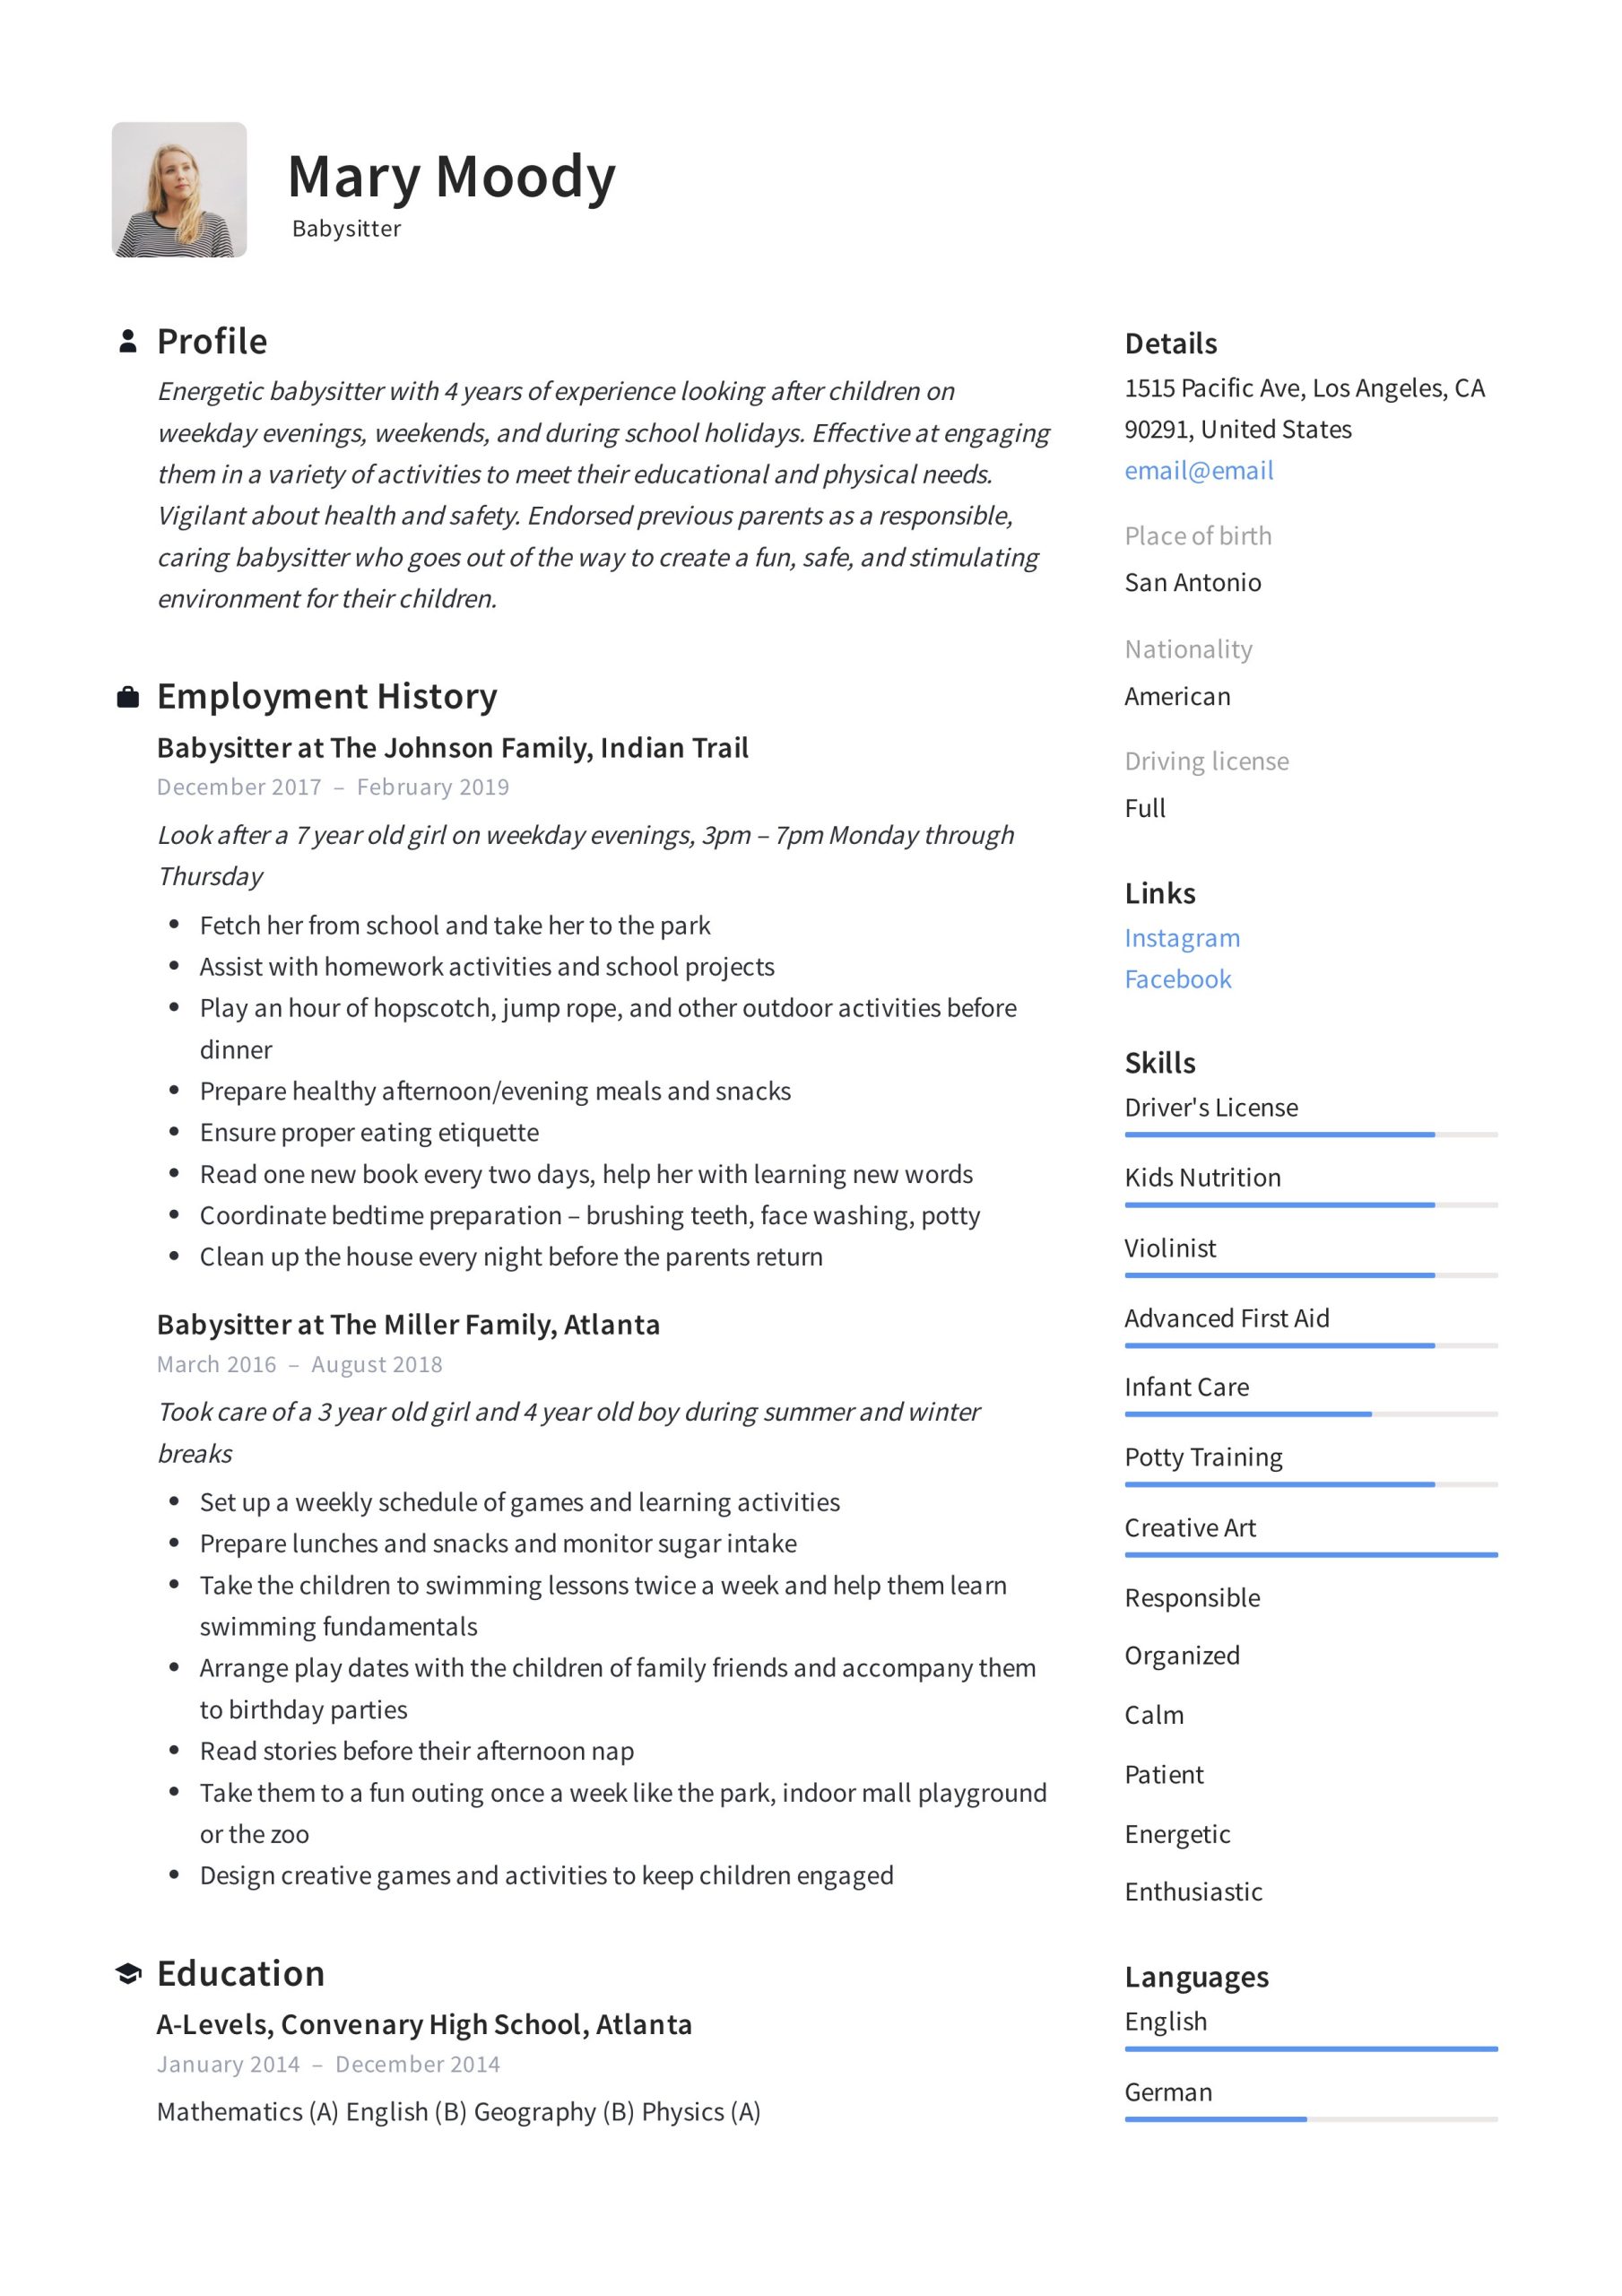 Sample Resume for Newborn Care Specialists 19 Babysitter Resume Examples & Writing Guide 2022